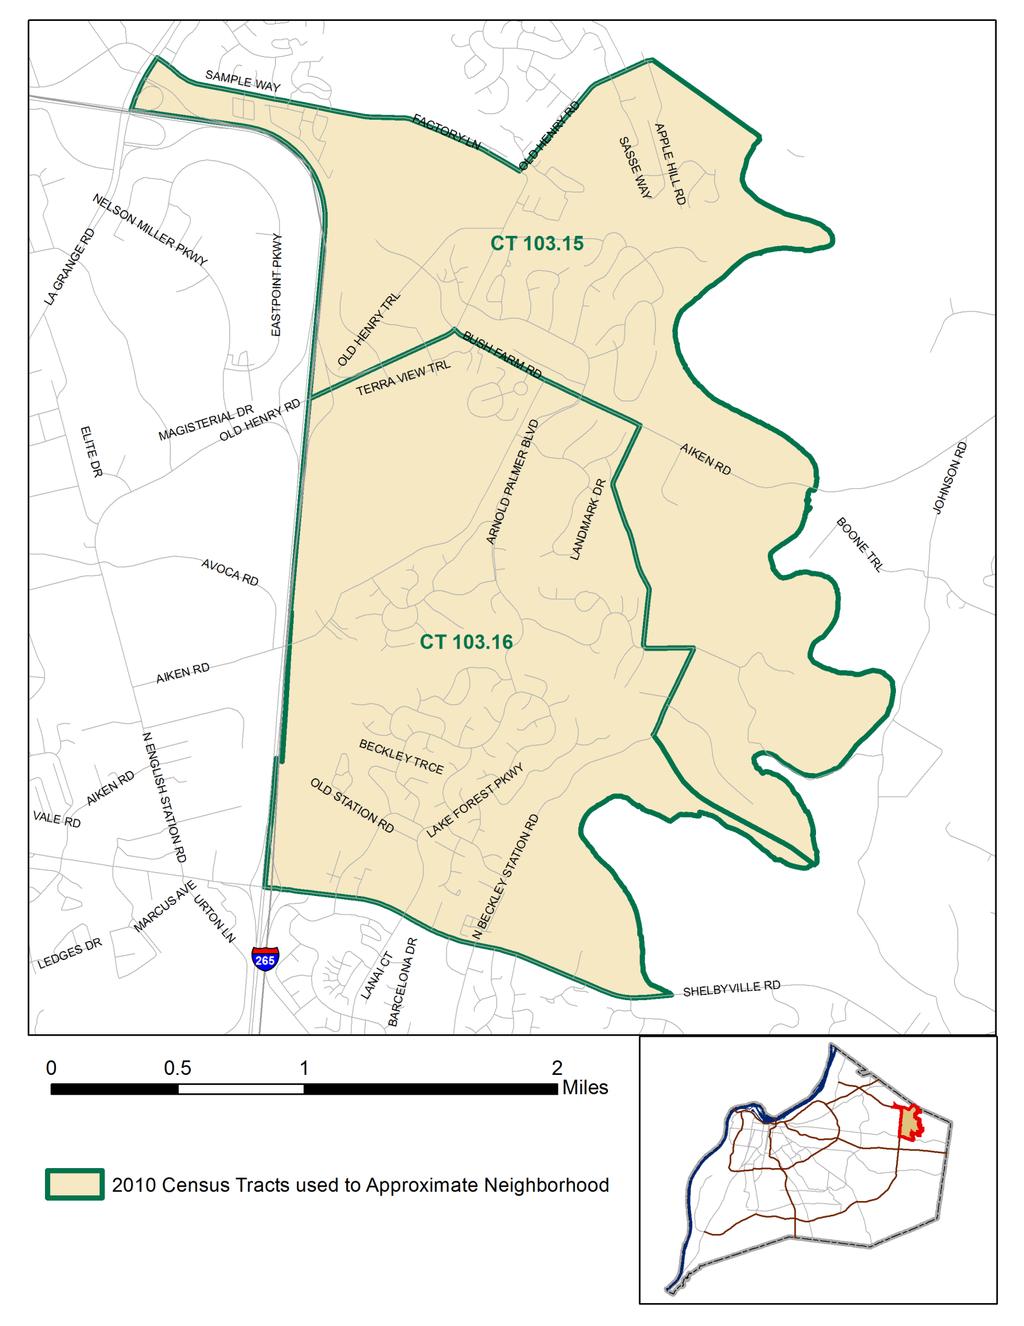 in the 2000 Census have been defined by groups of census tracts, and named after a prominent road or feature in the area.